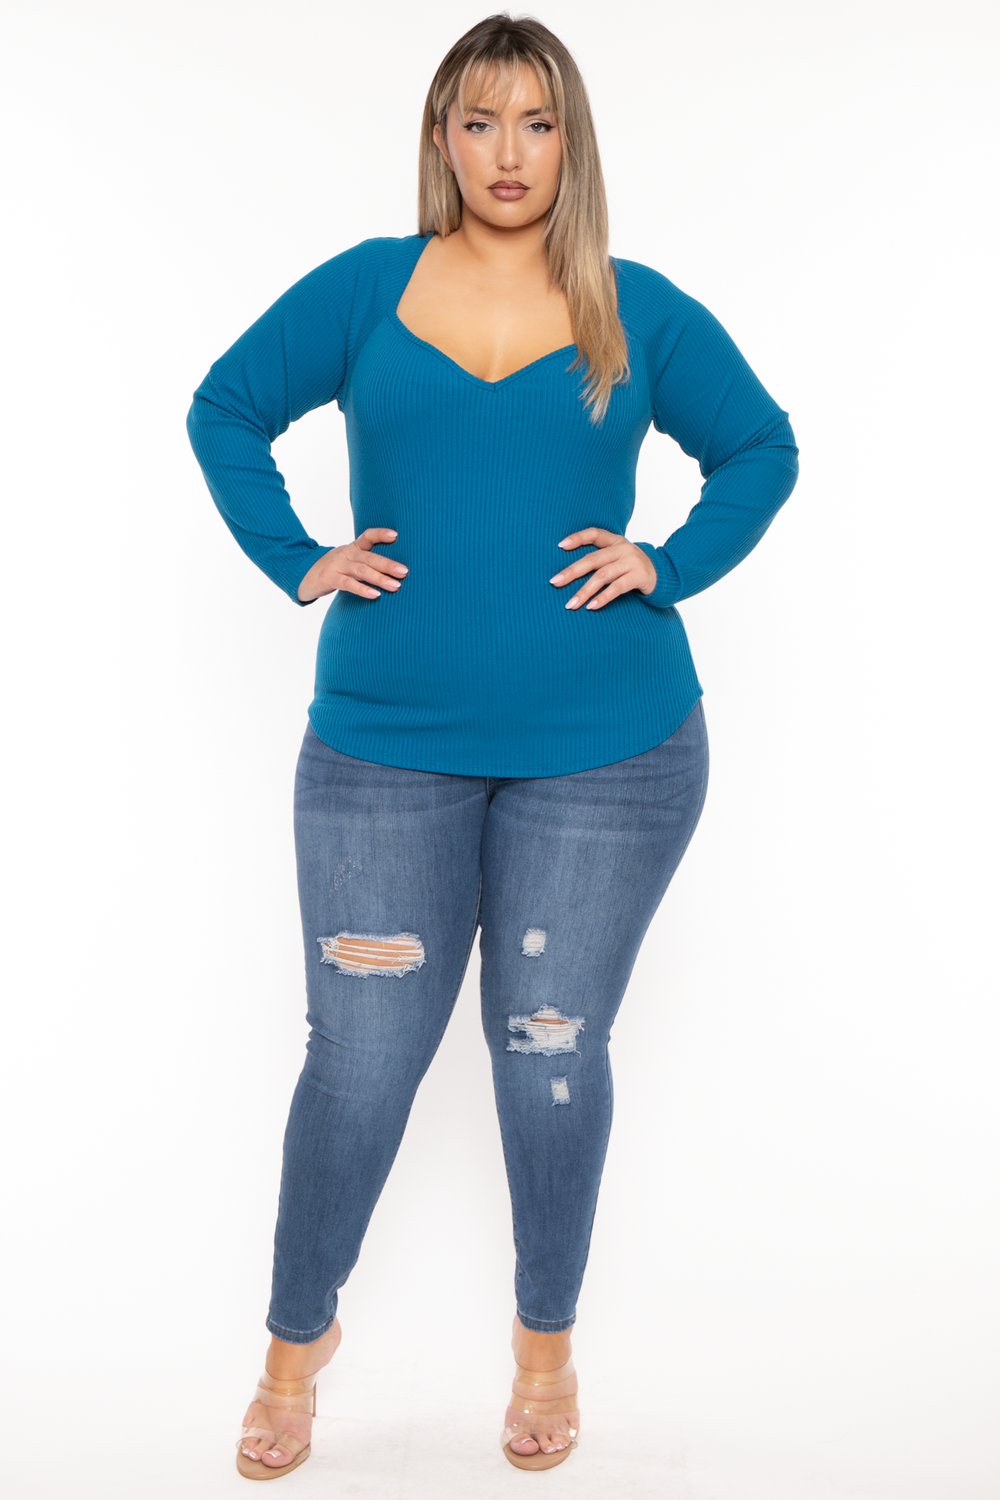 CULTURE CODE Tops Plus Size  Lia Sweetheart Ribbed  Top- Teal